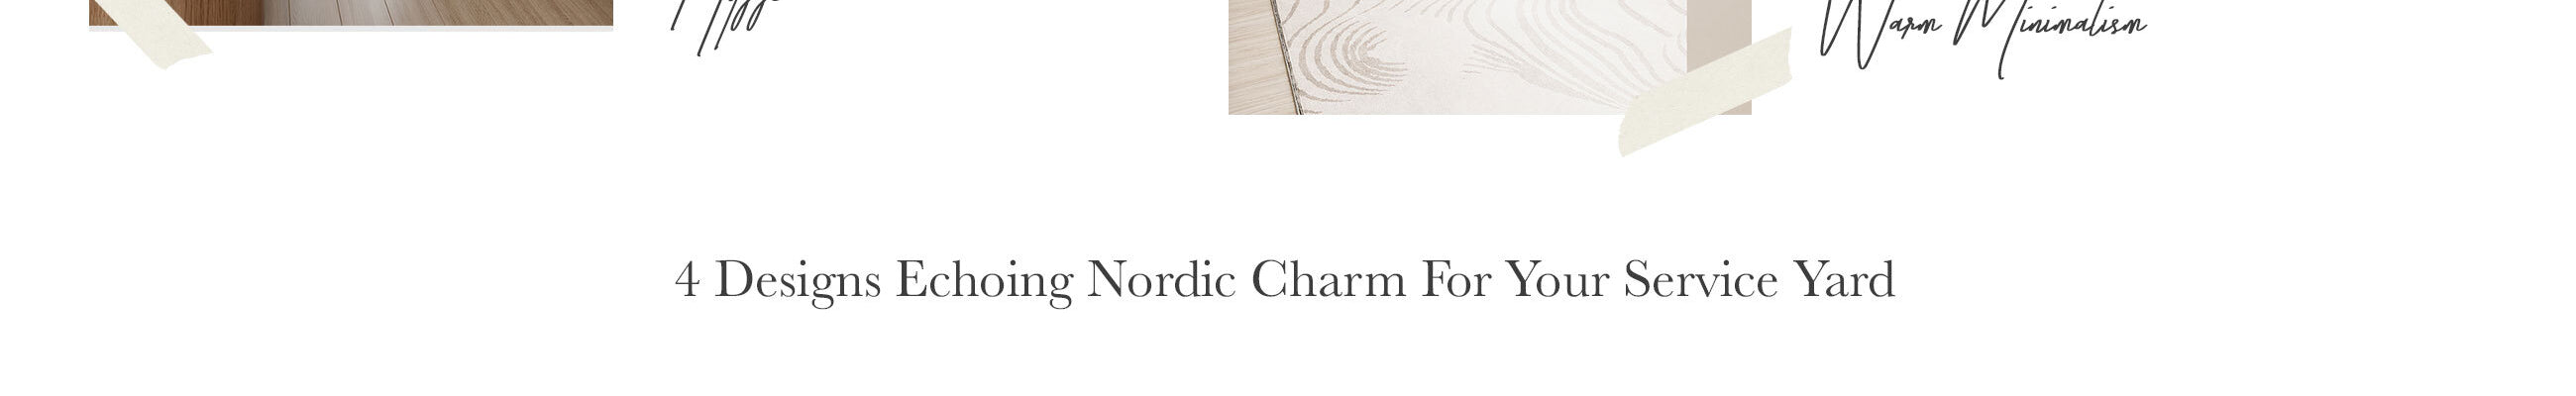 4 Designs Echoing Nordic Charm For Your Service Yard 